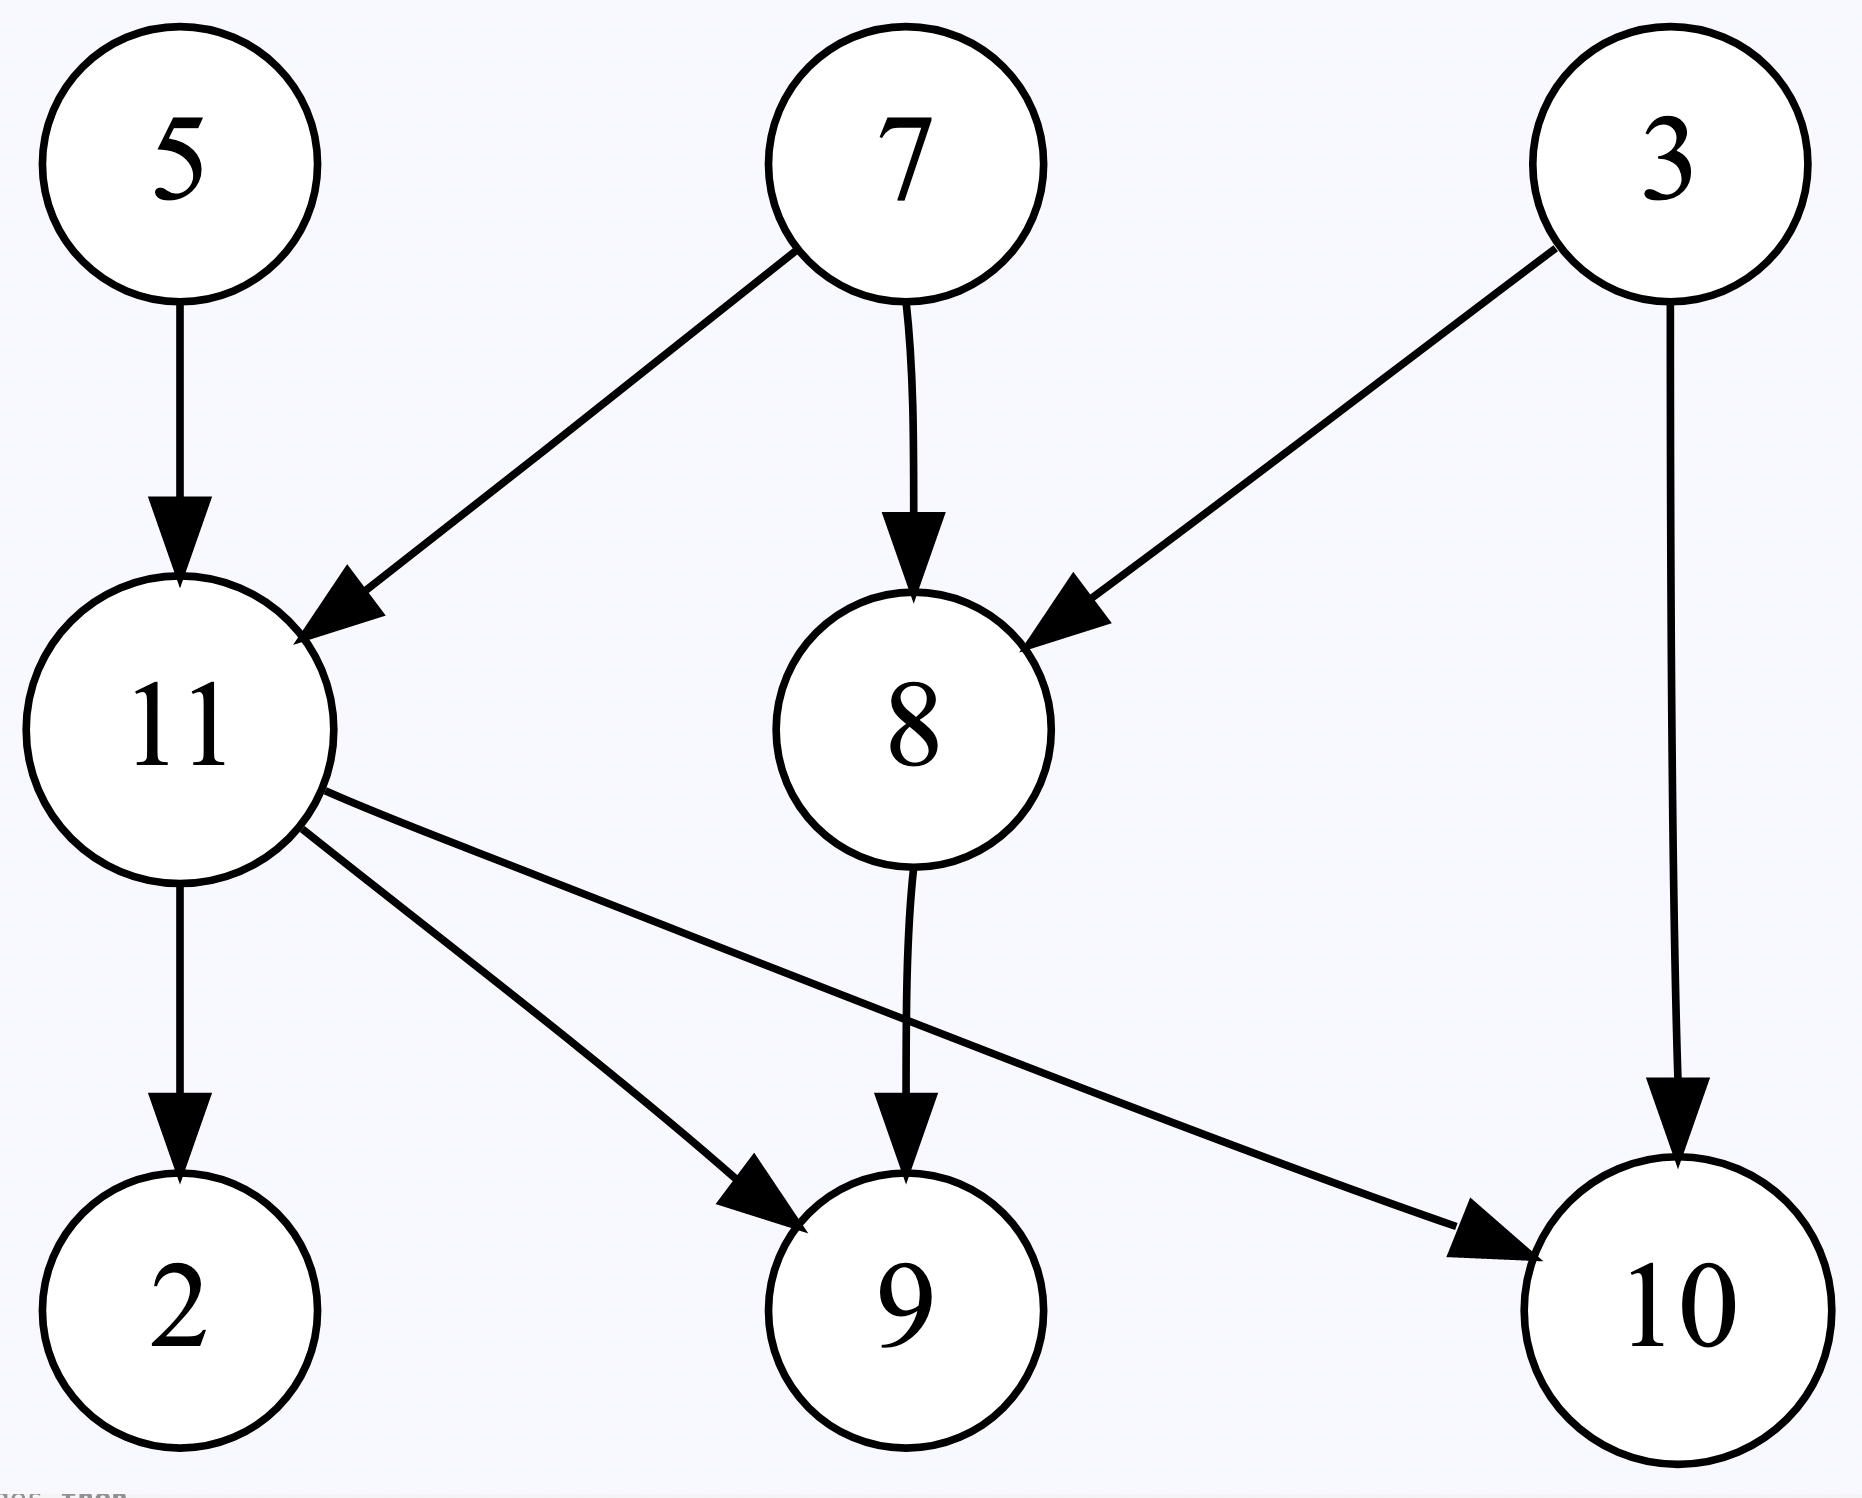 A collection of 8 nodes with the following associations from top to bottom: (5) points to (11). (7) points to (11) and (8). (3) points to (8) and (10). (11) points to (2), (9), and (10). (8) points to (9).